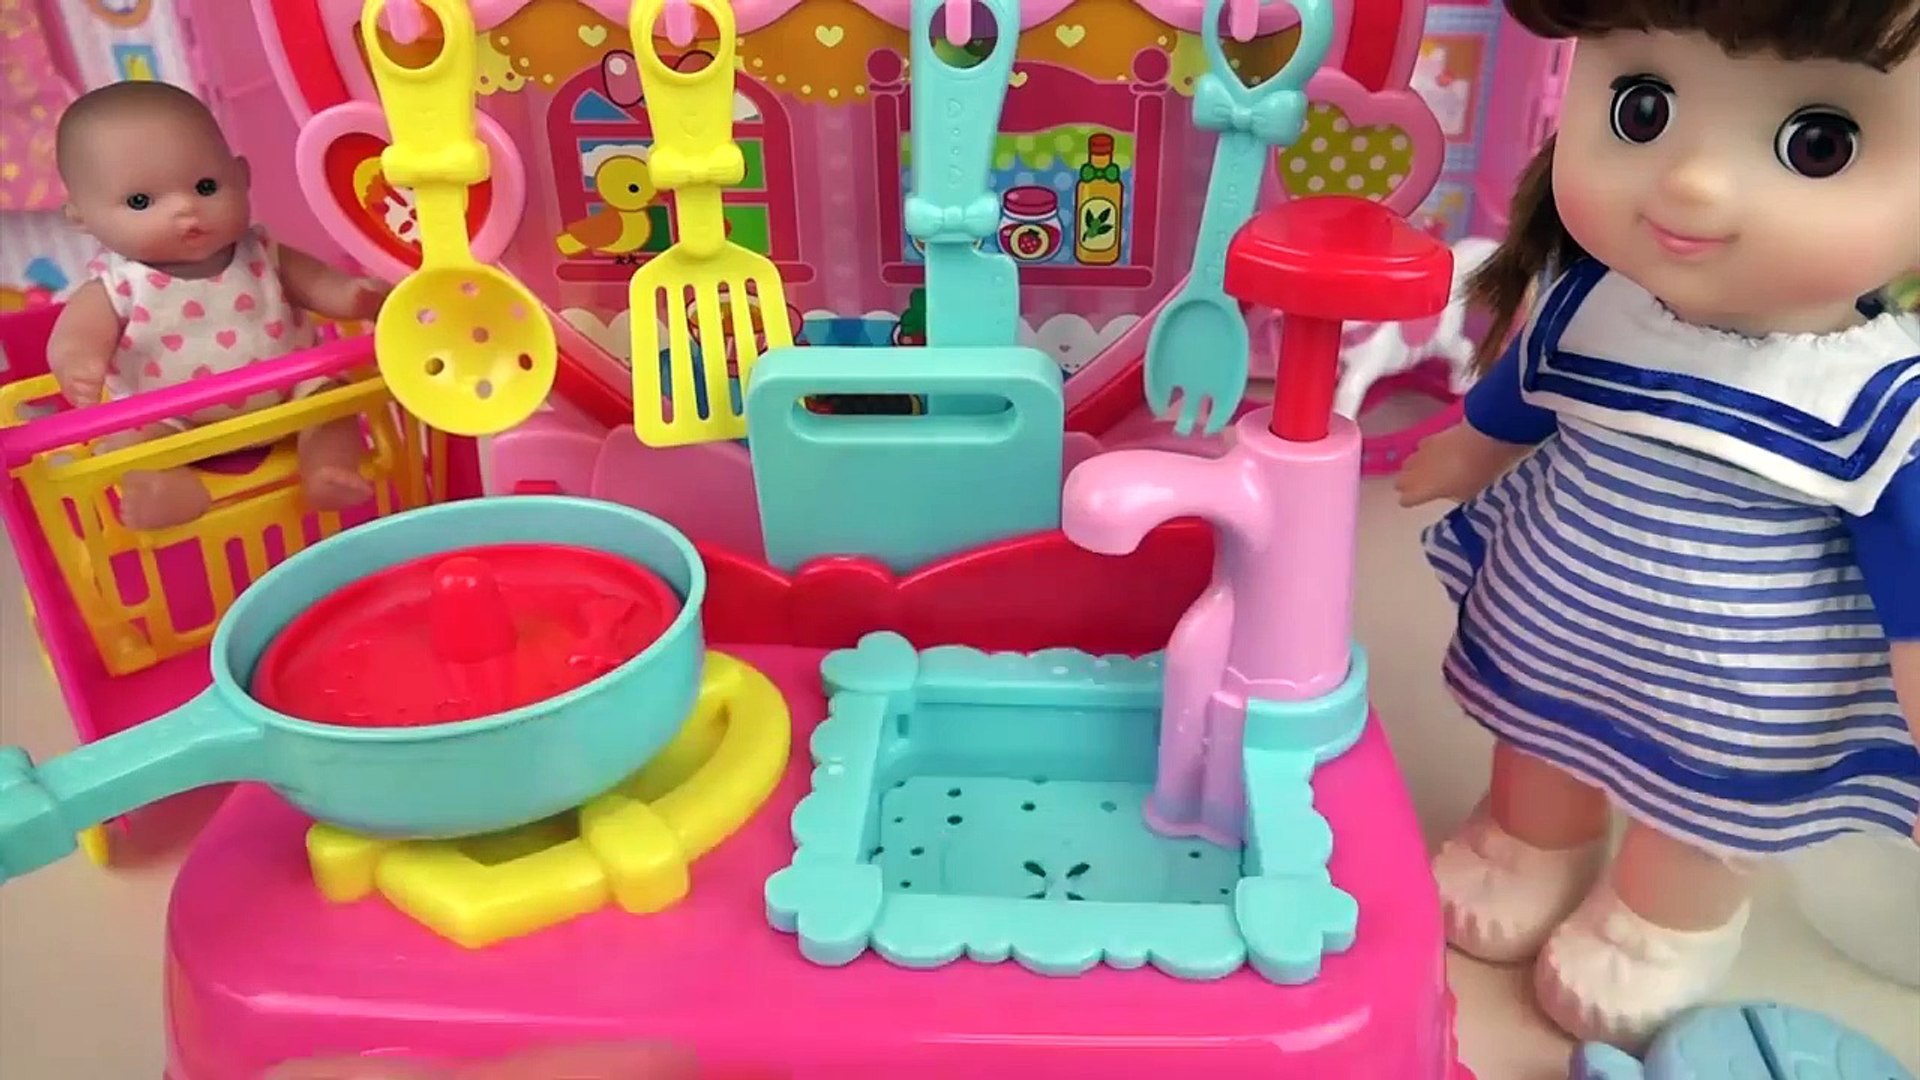 Kitchen and food cooking toys and baby doll play